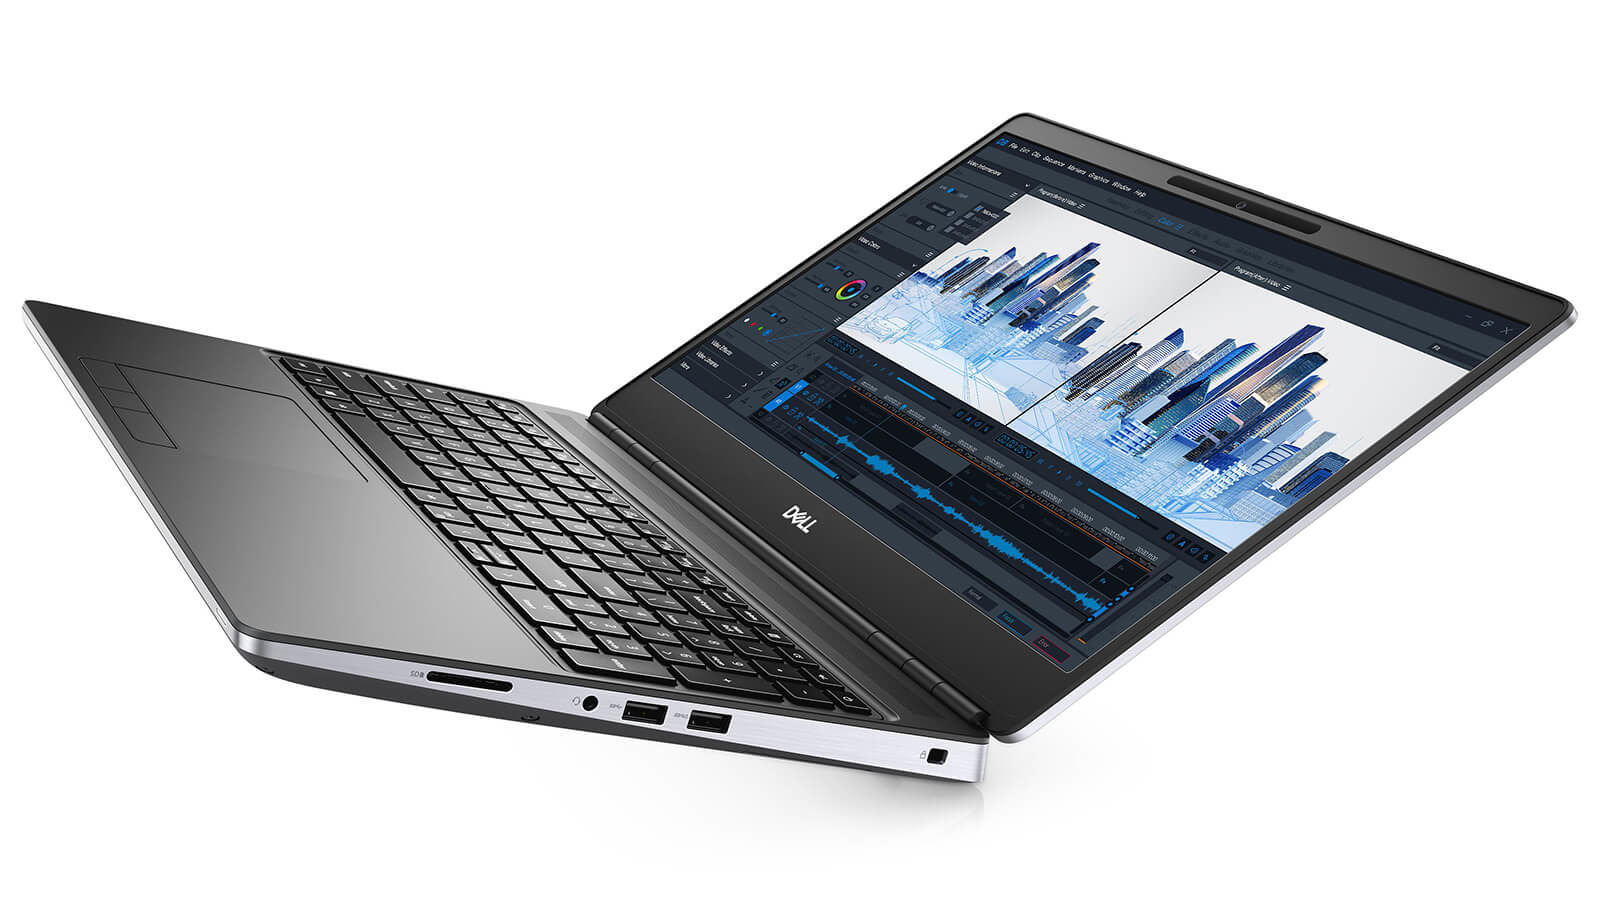 Dell Precision 7560 Mobile Workstation Features 01